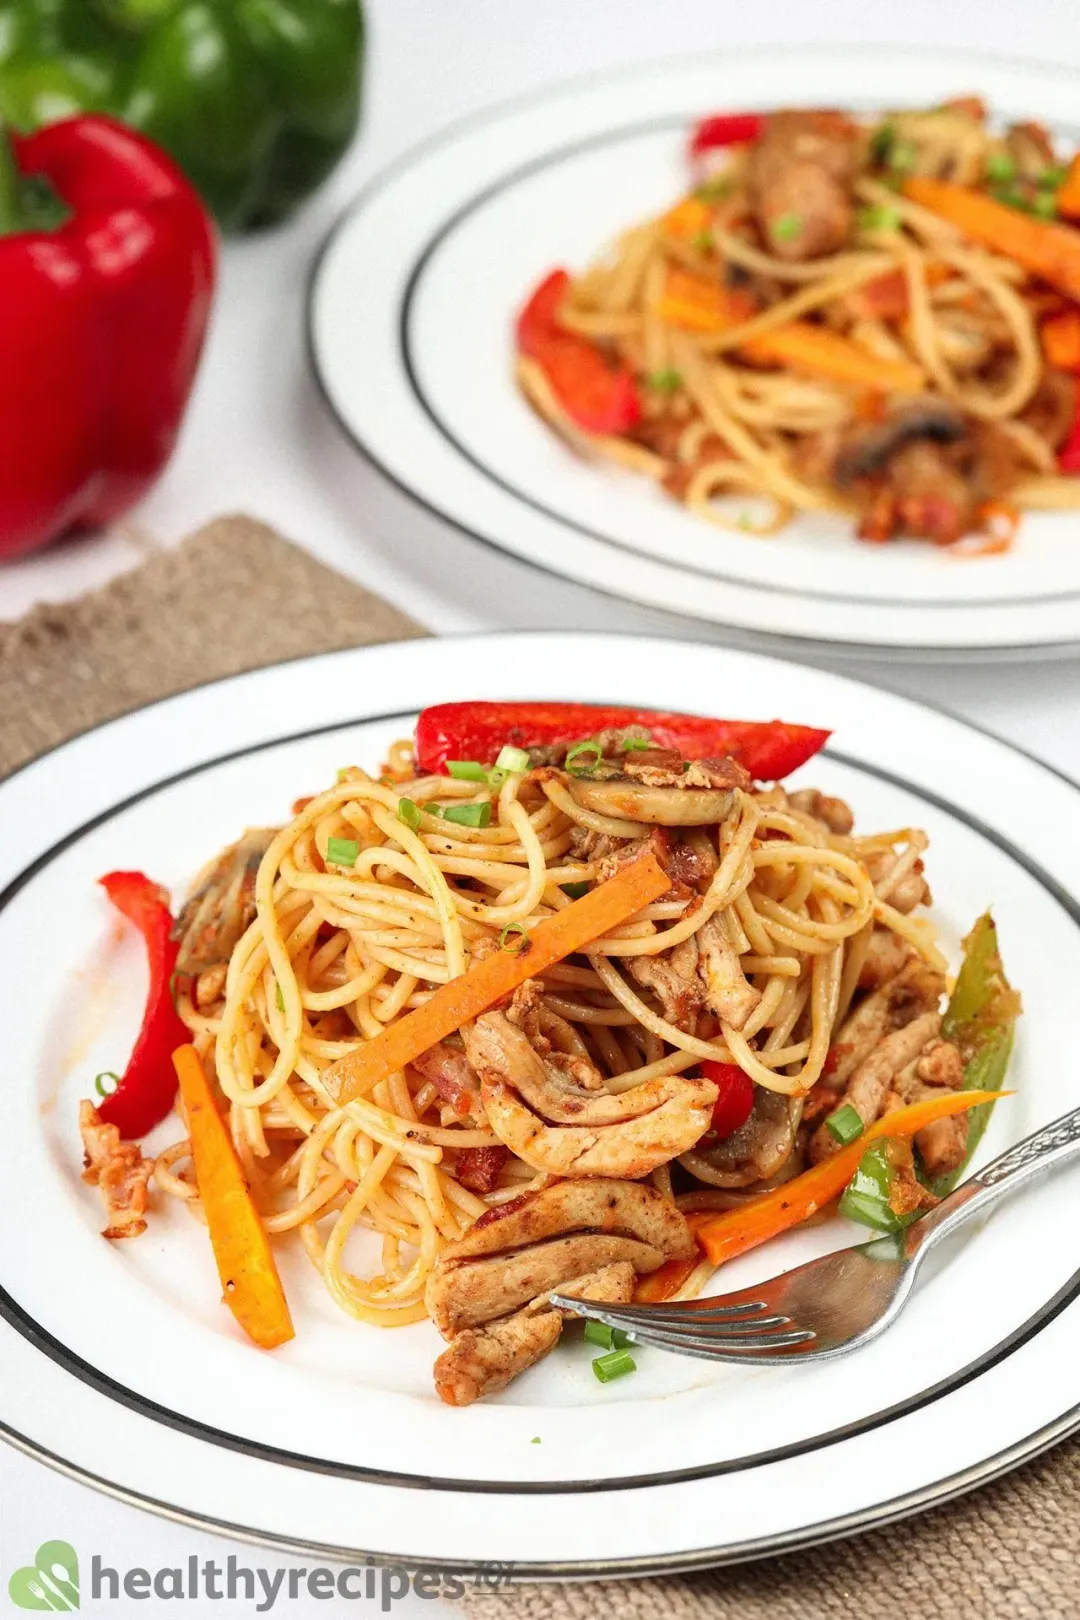 Side Dishes for Stir fried Spaghetti